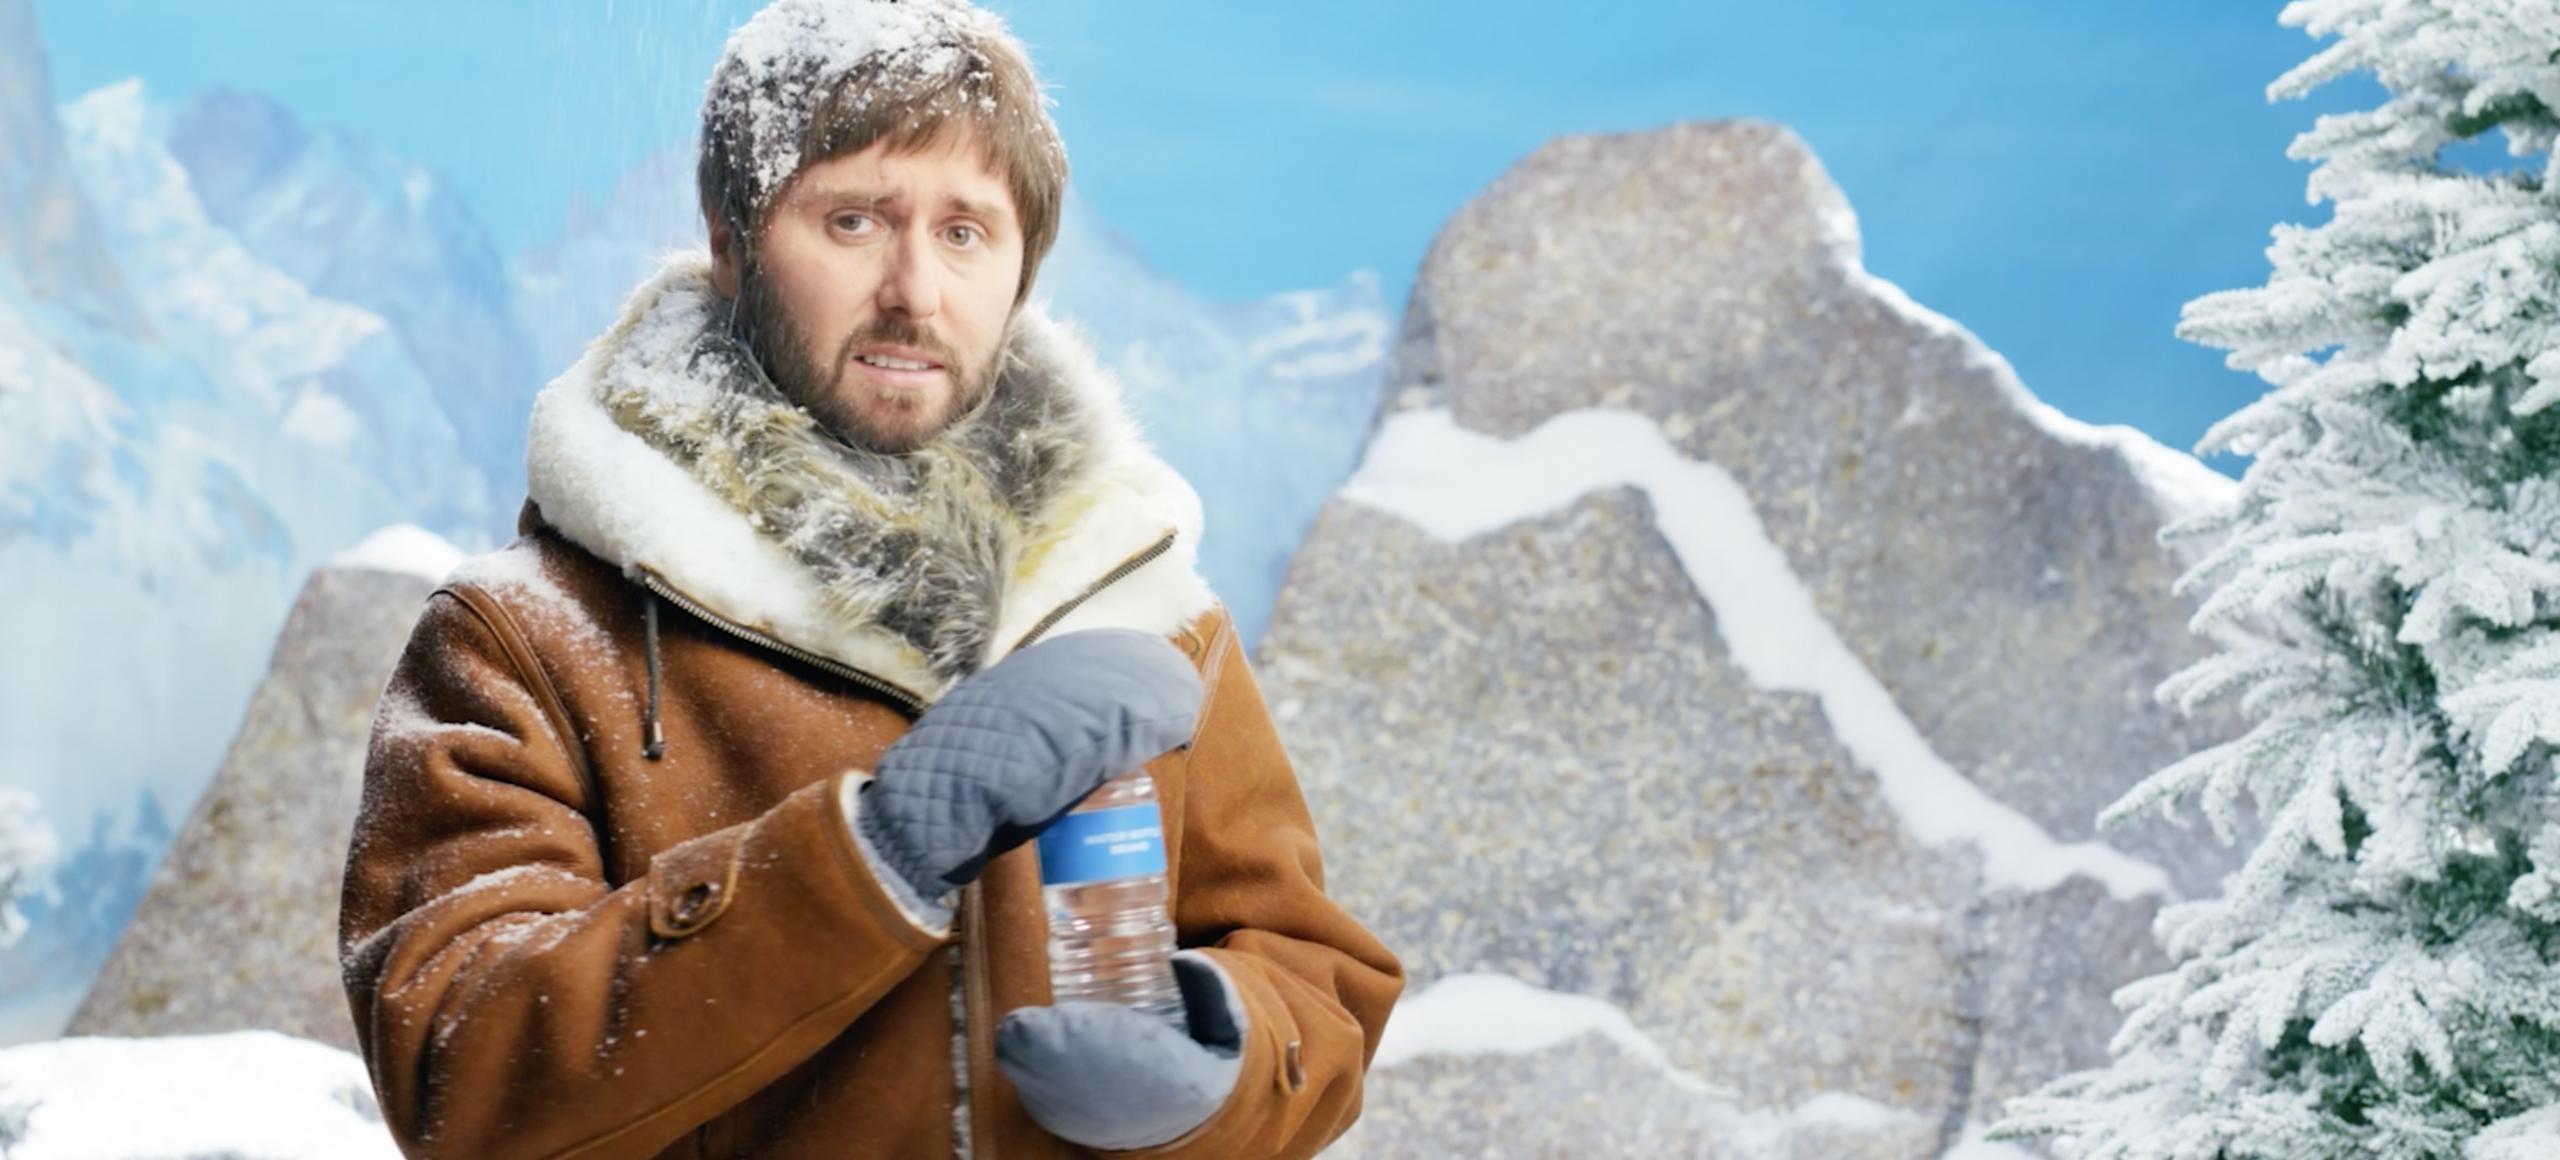 James Buckley trying to open single-use plastic bottle